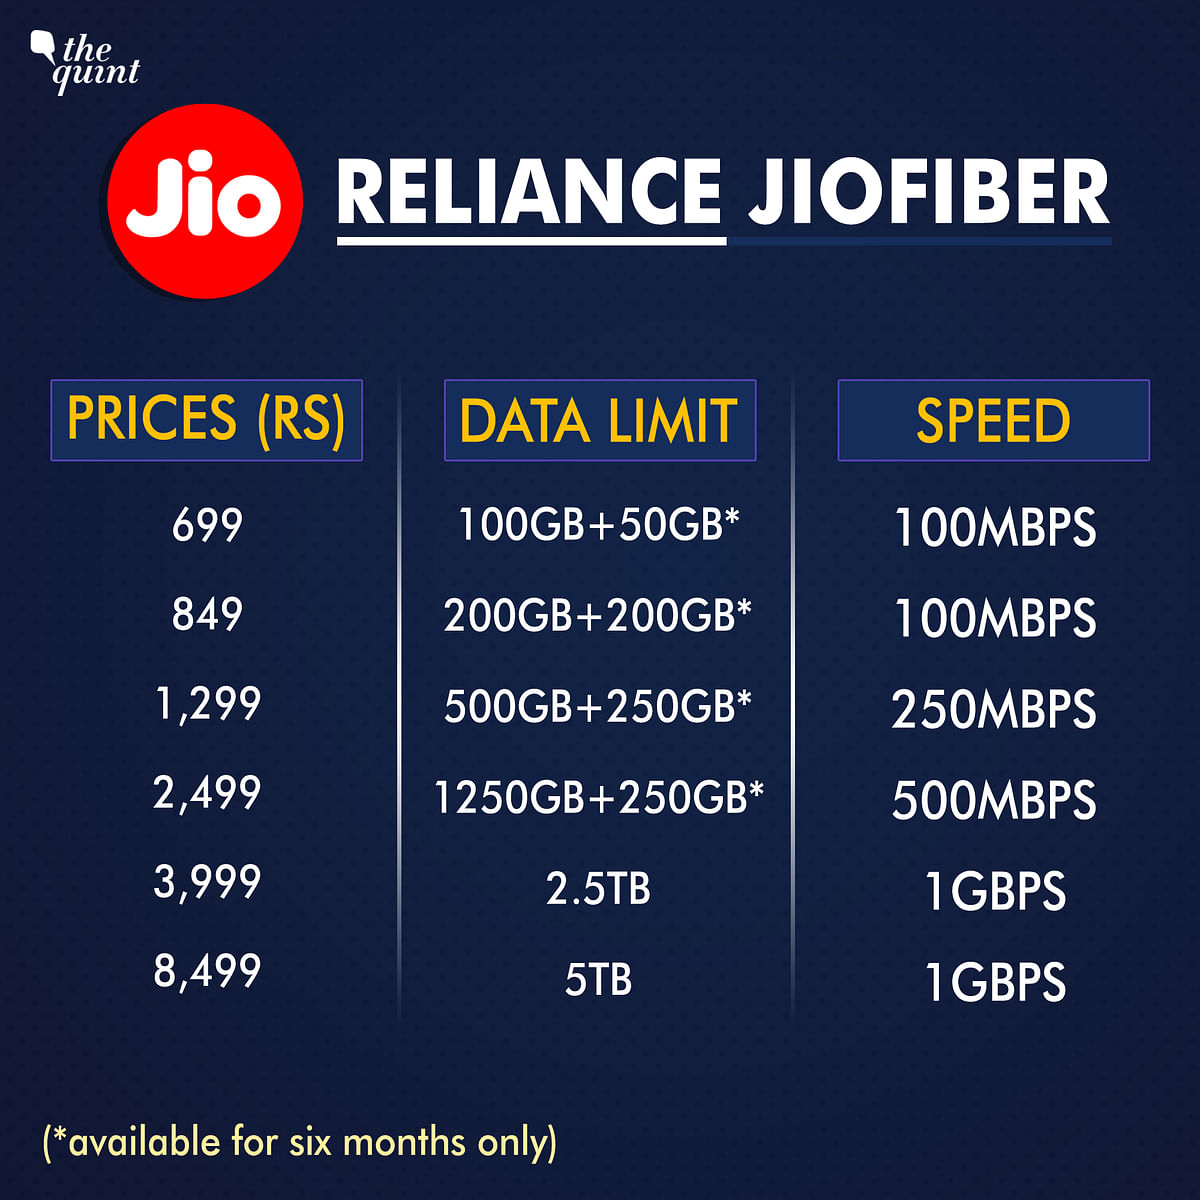 Airtel’s latest set of data plans now offer speed up to 1Gbps which is similar to what JioFiber is offering.